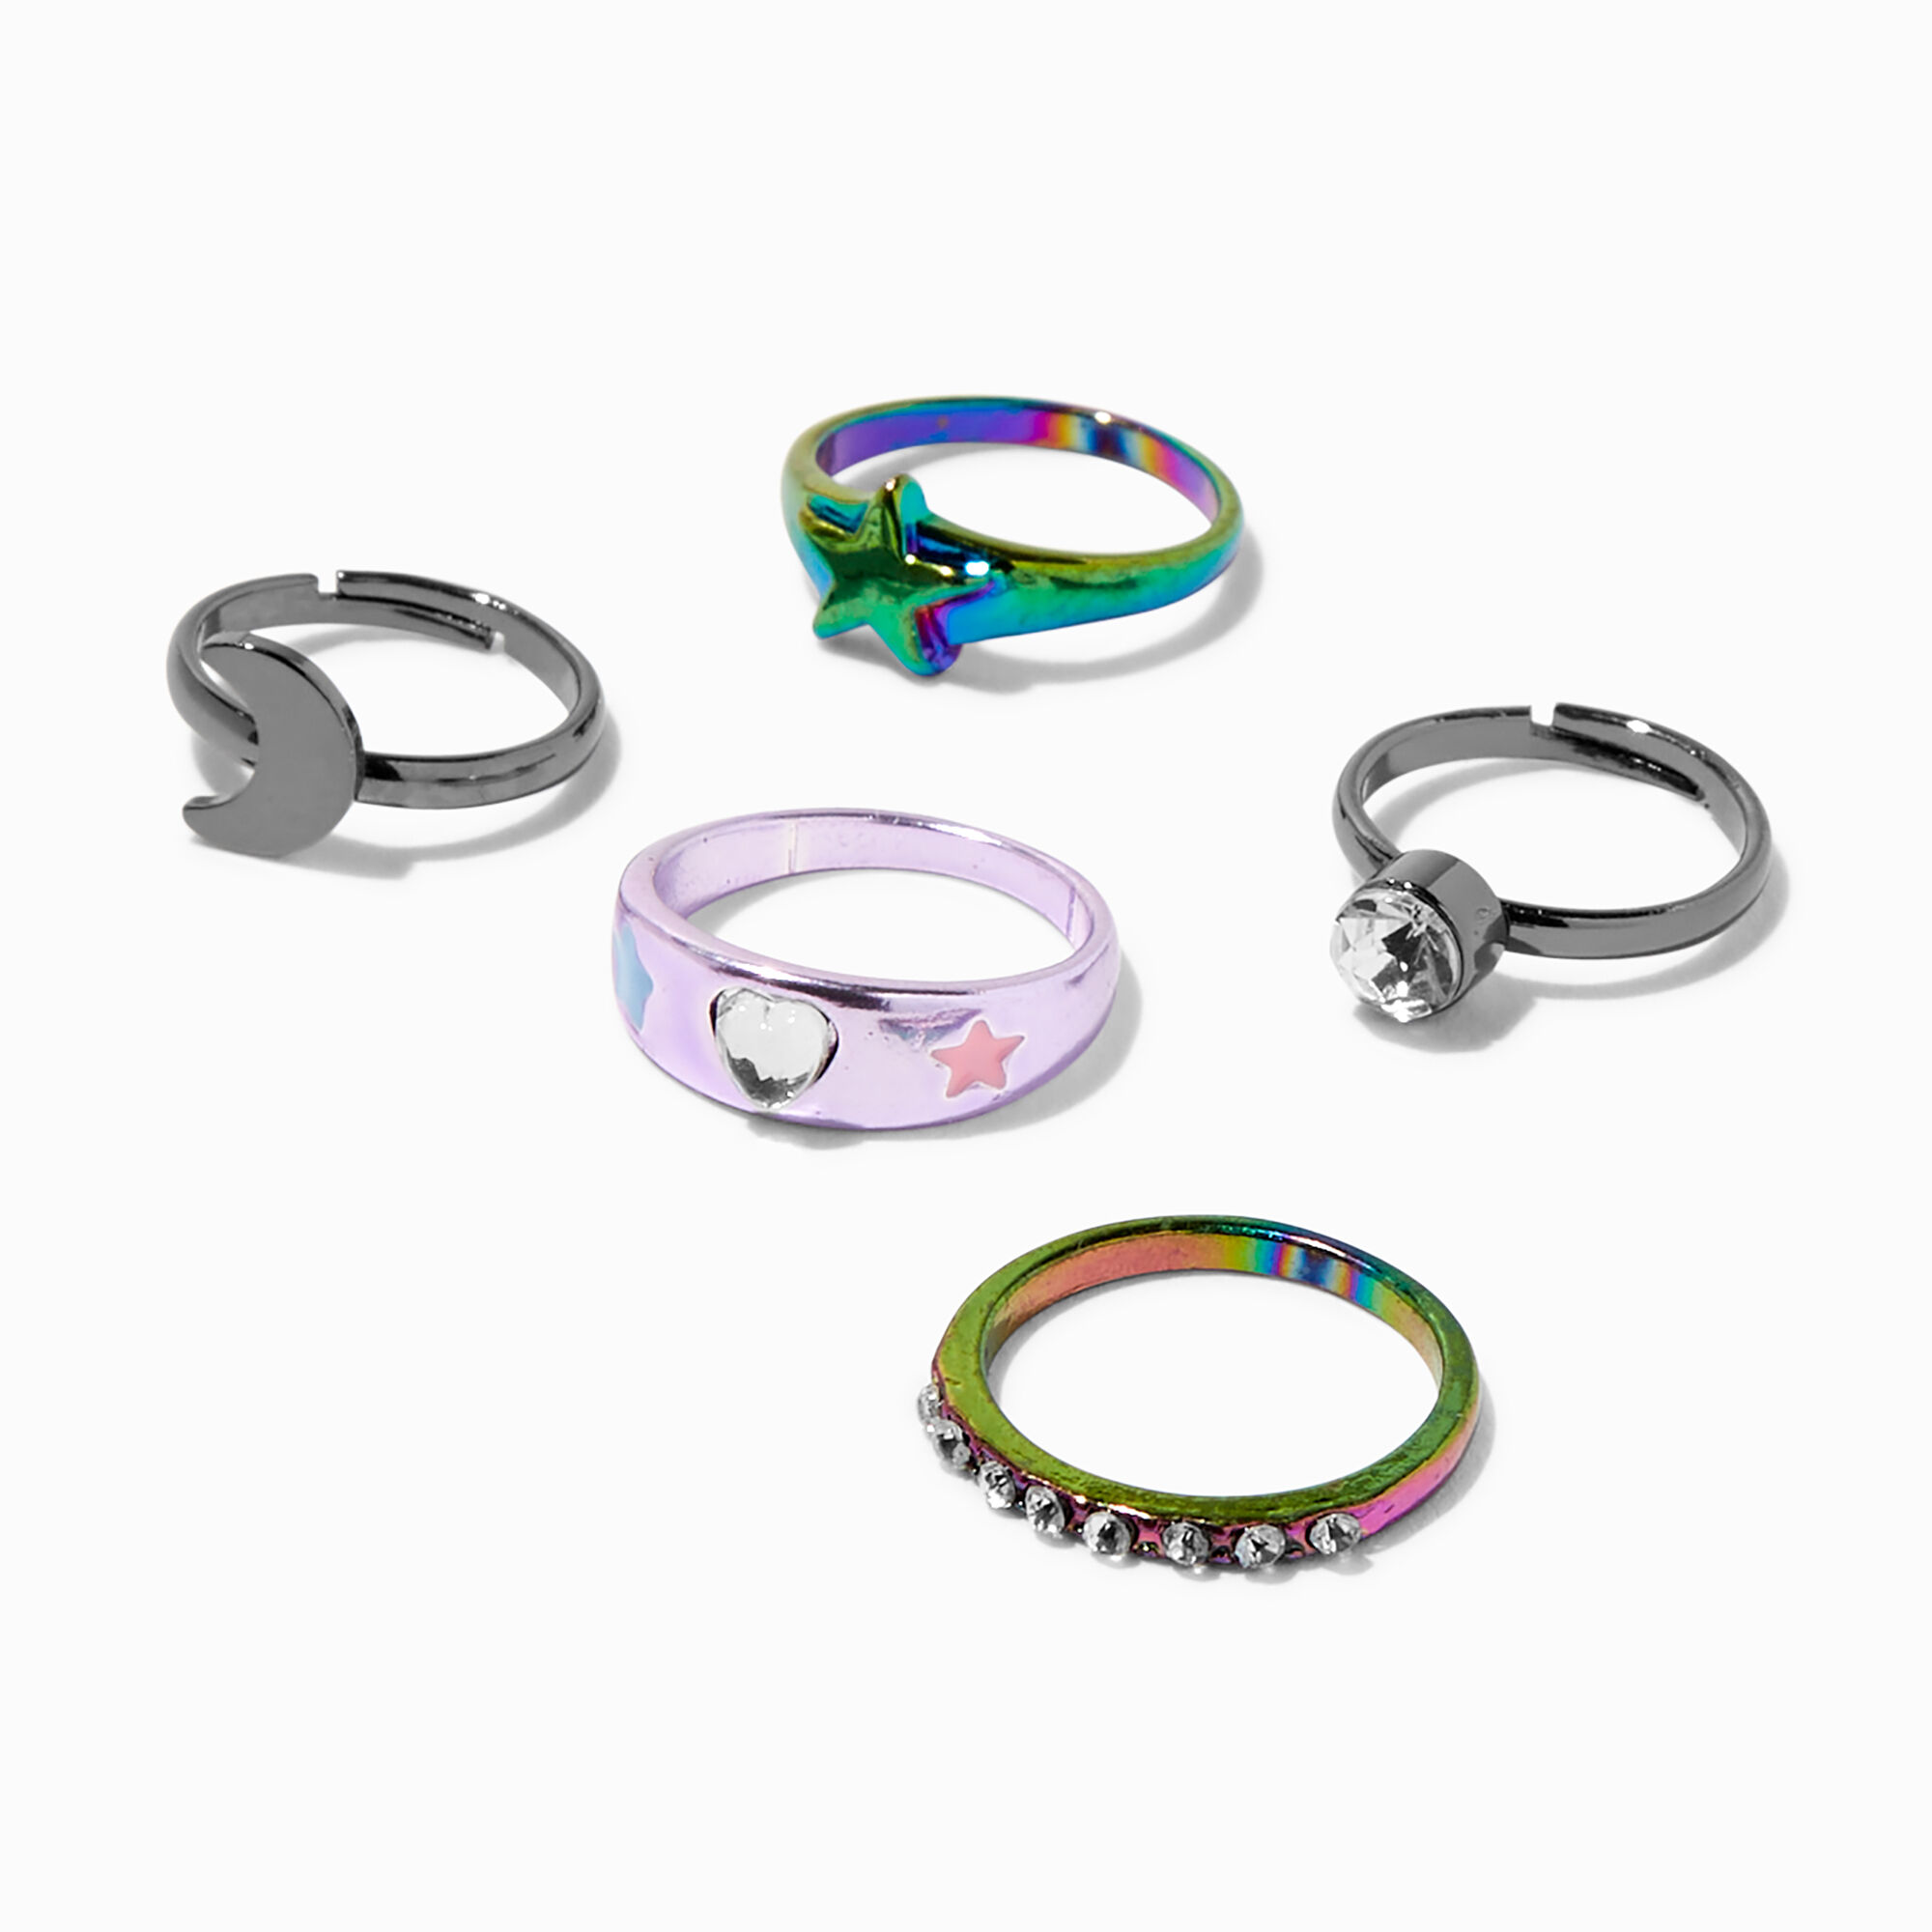 View Claires Club Mixed Metals Celestial Rings 5 Pack information